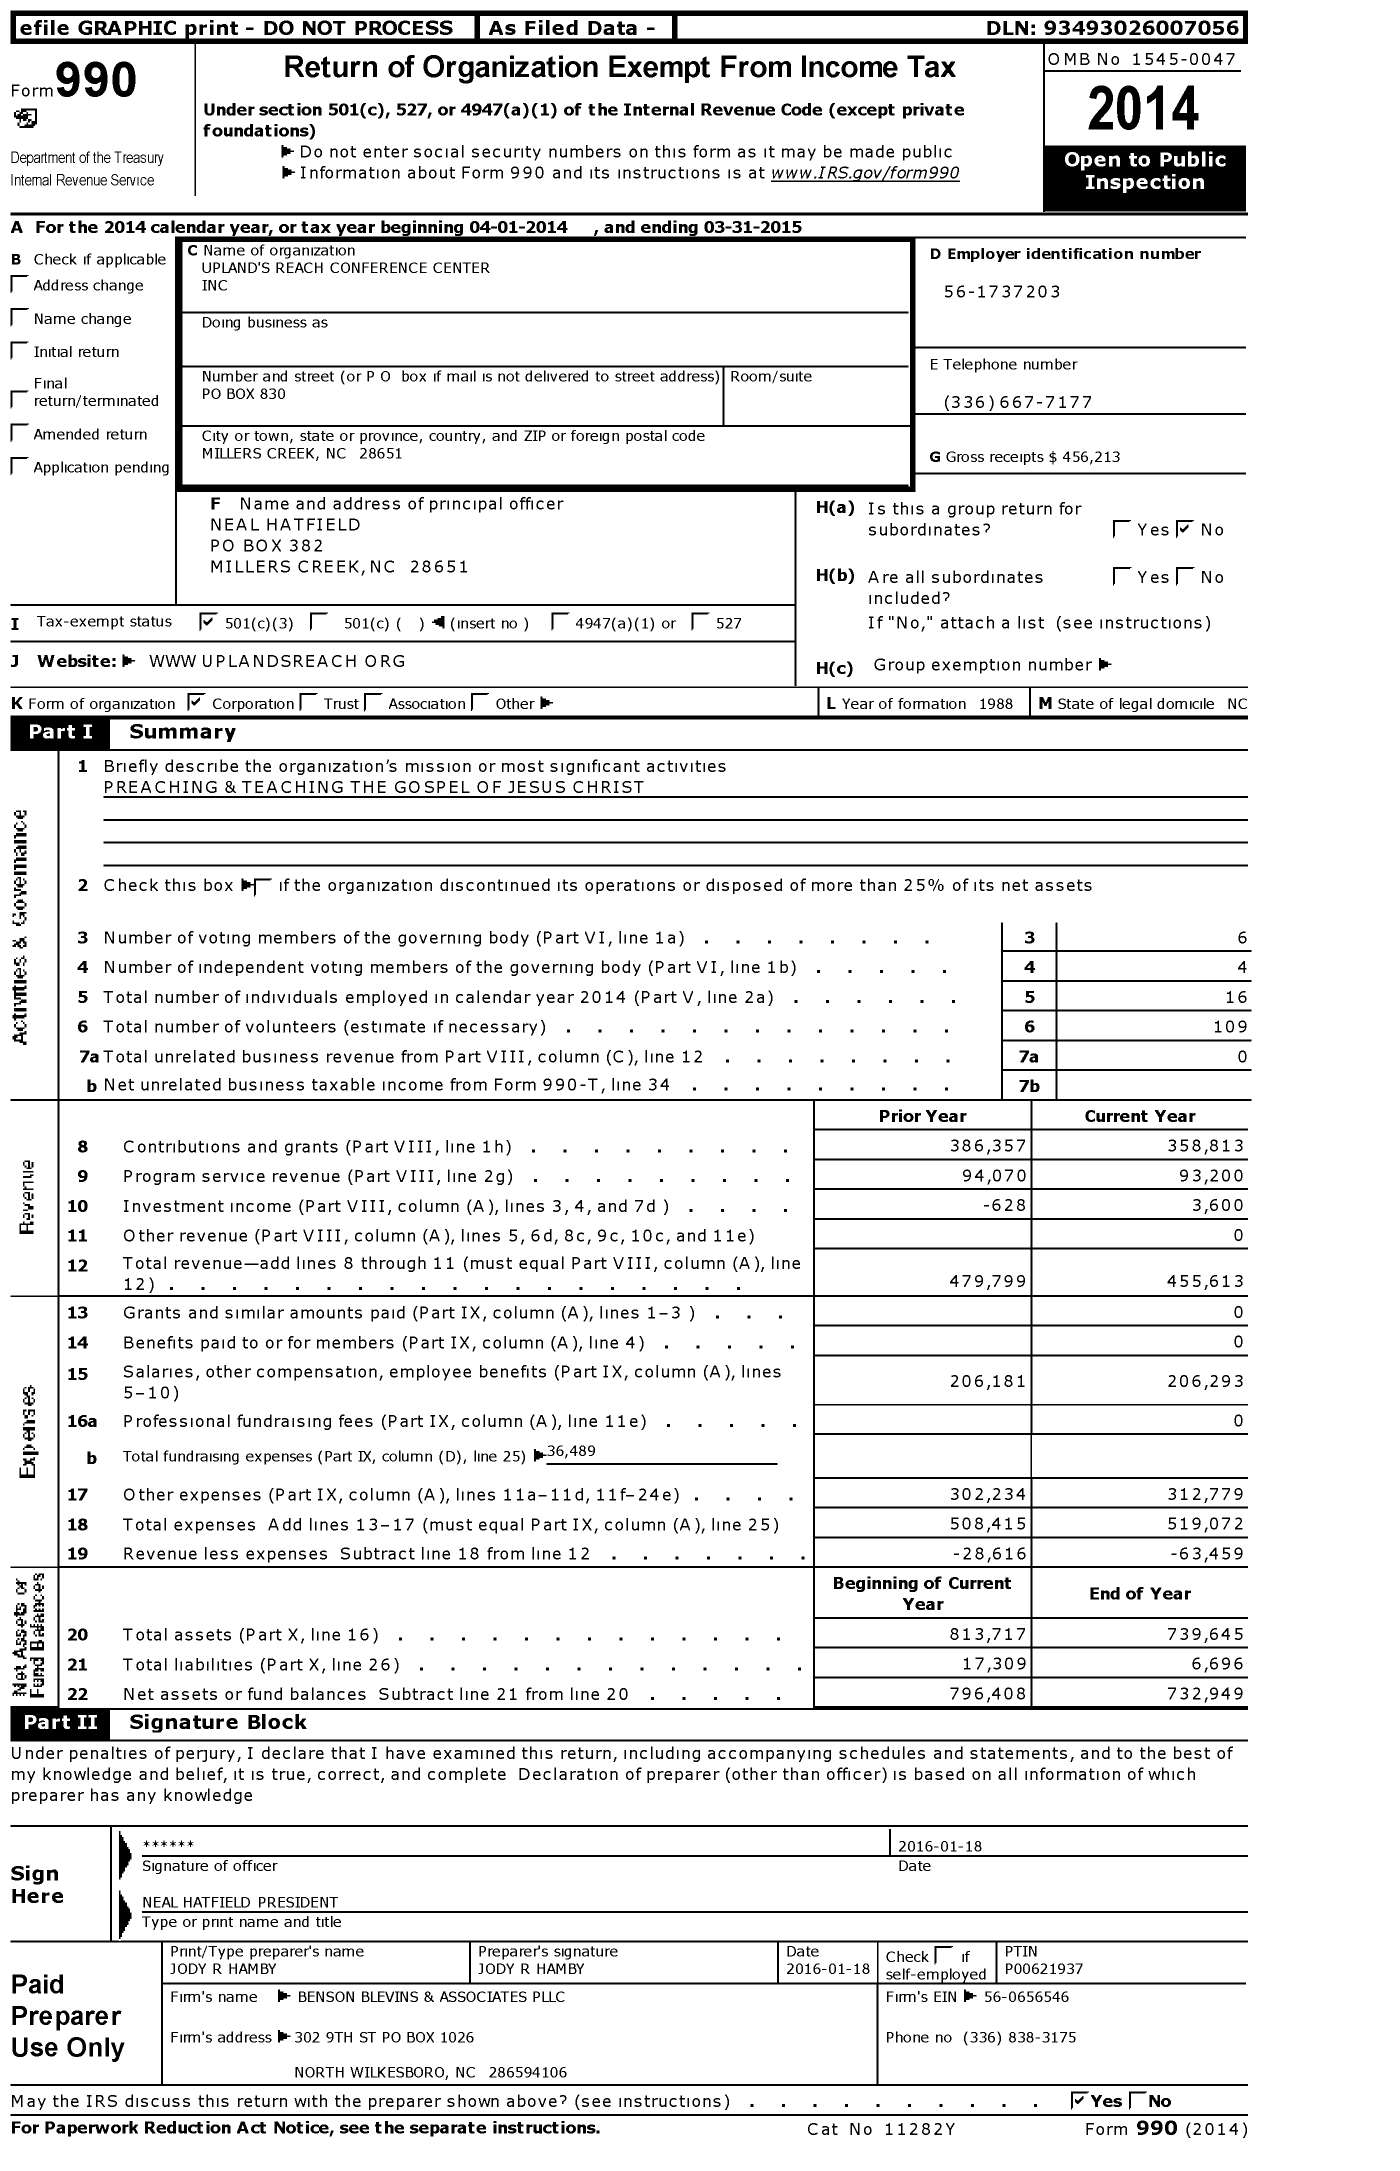 Image of first page of 2014 Form 990 for Upland's Reach Conference Center